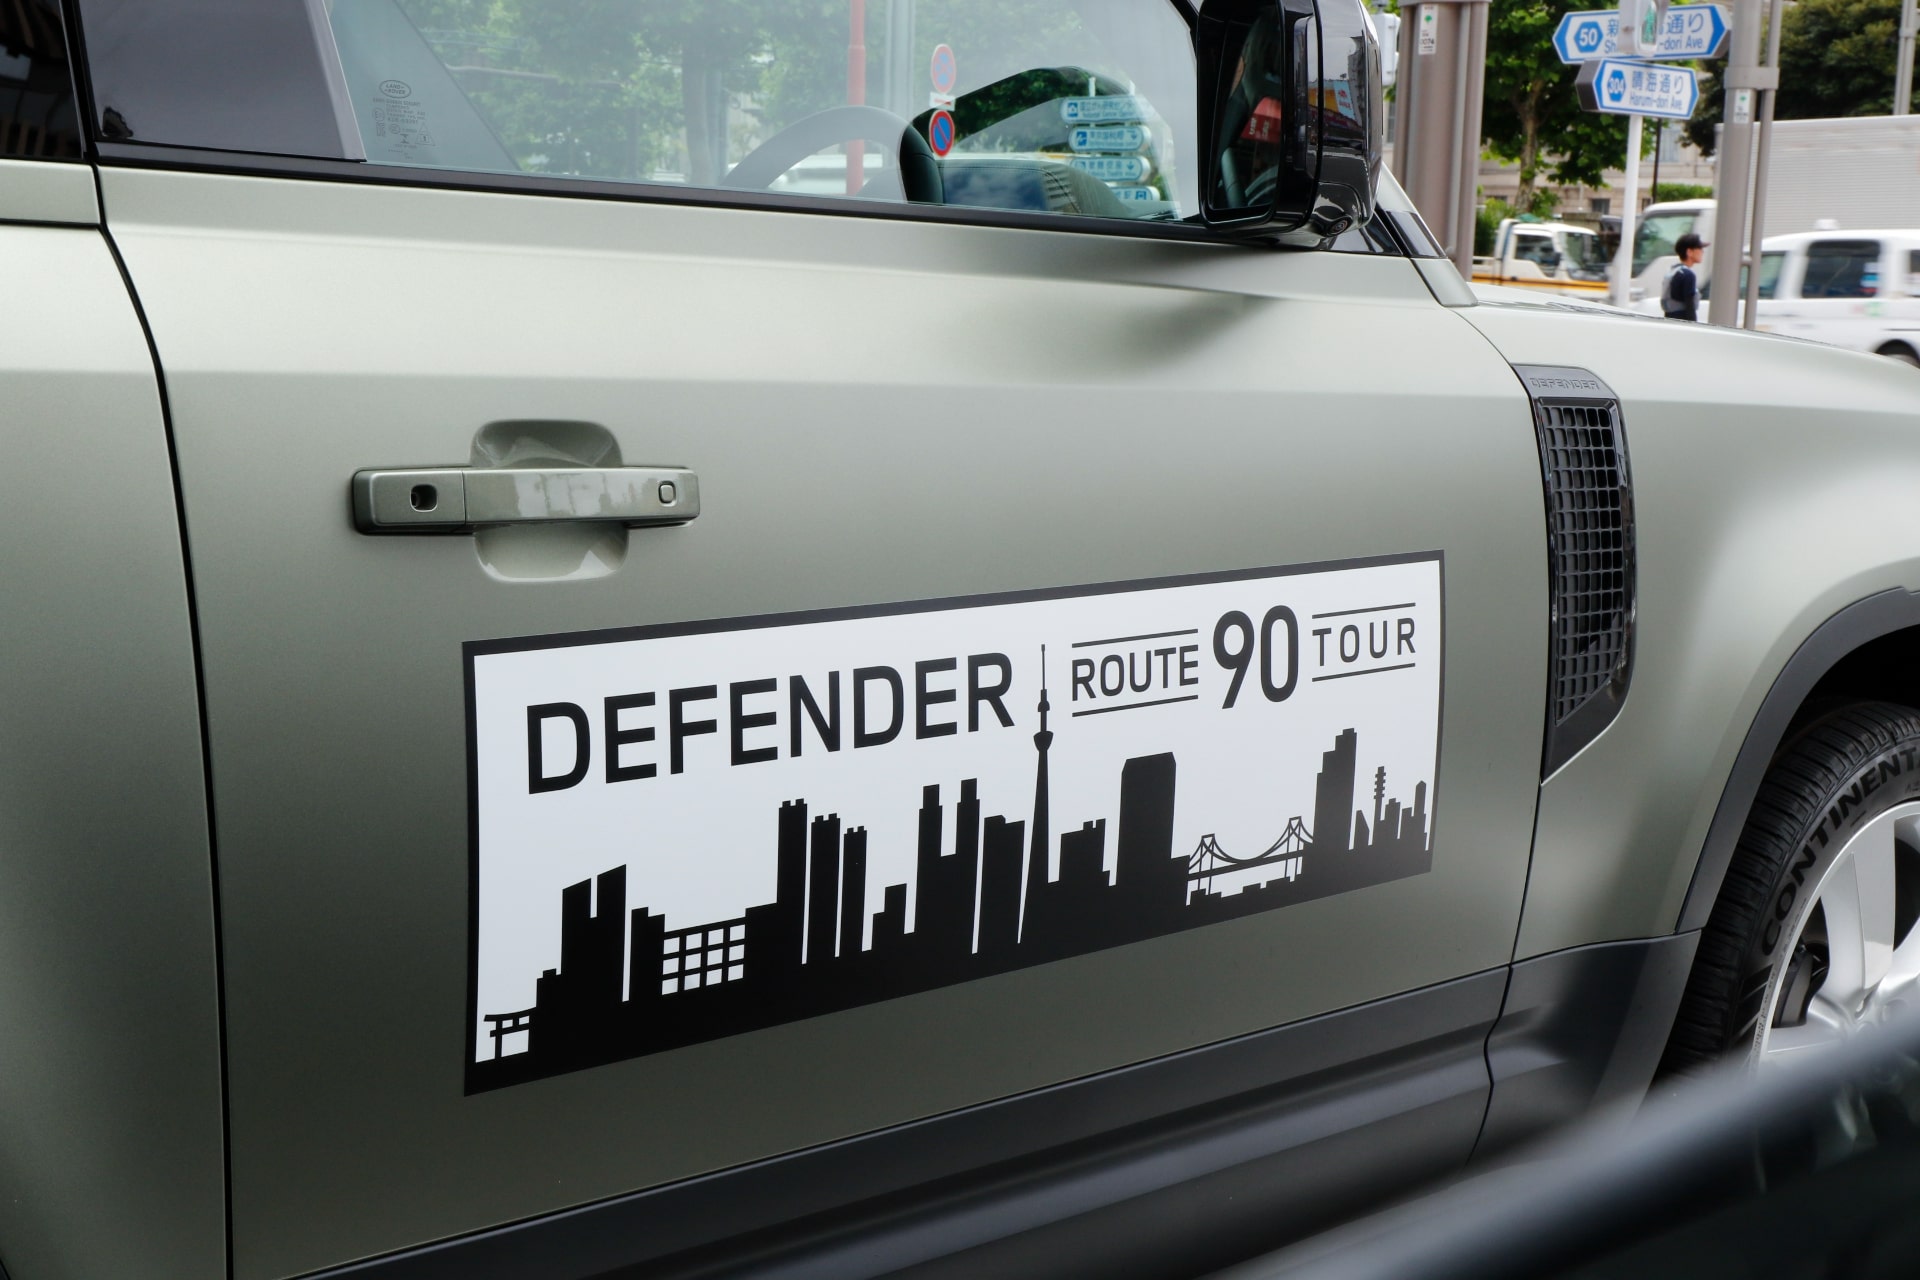 「DEFENDER ROUTE 90 TOUR」の様子(9)